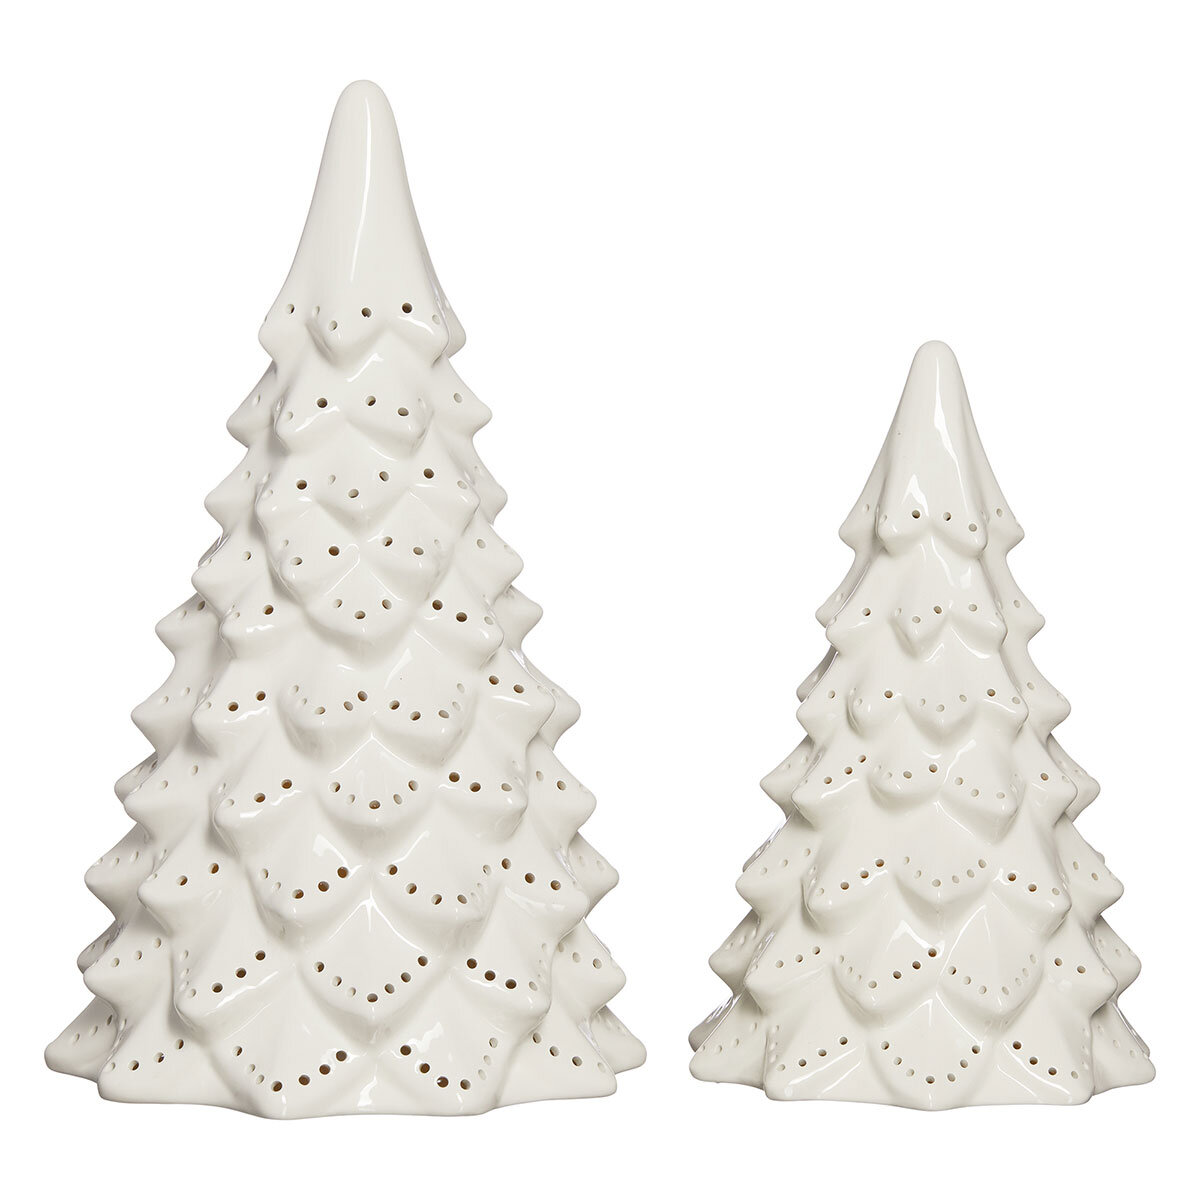 Buy 2 Piece Ceramic Trees Overview Image at Costco.co.uk